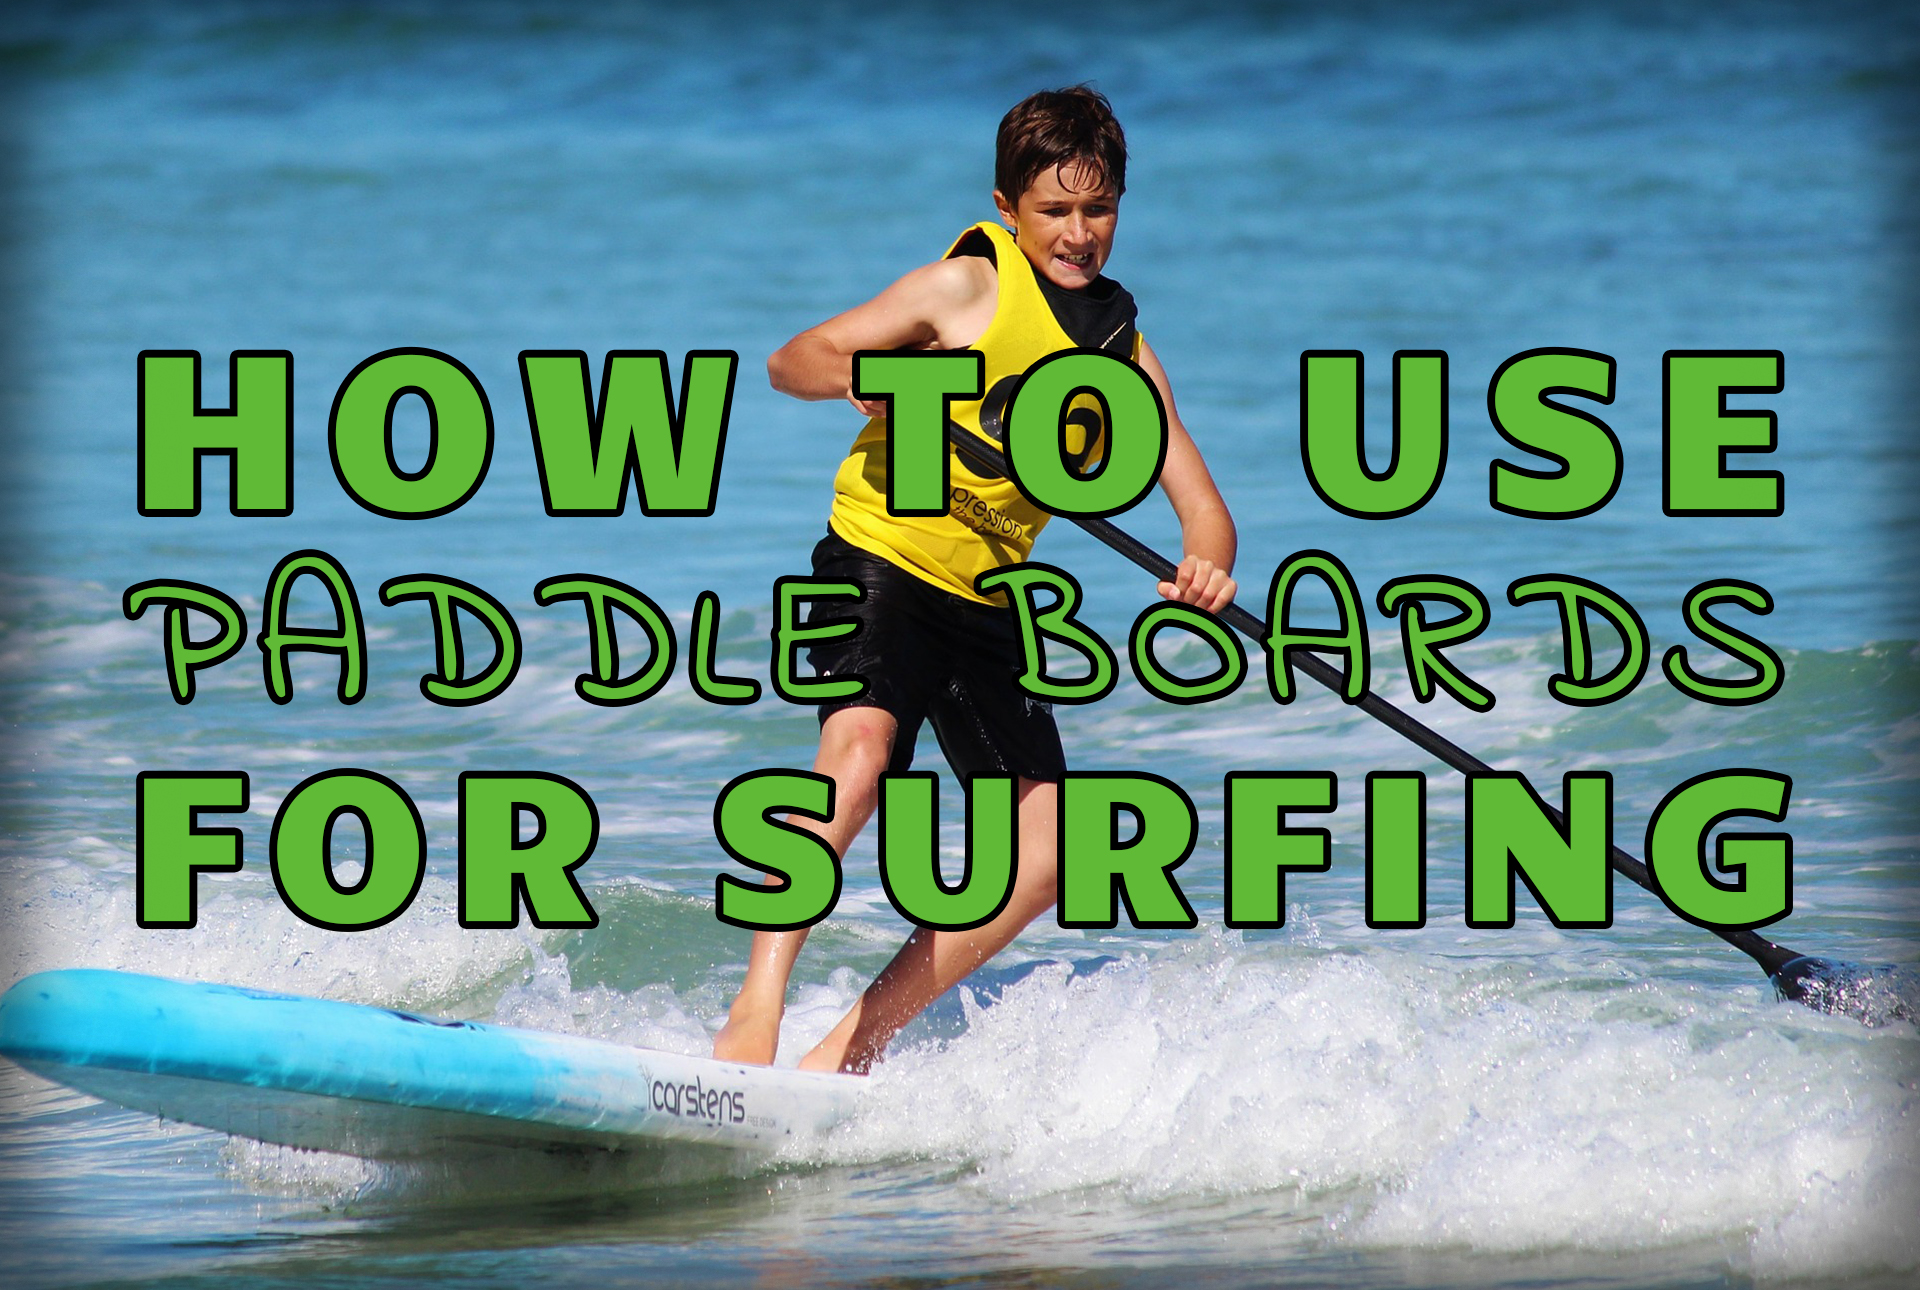 "How to Use Paddle Boards for Surfing" over an image of a child paddle boarding on a wave